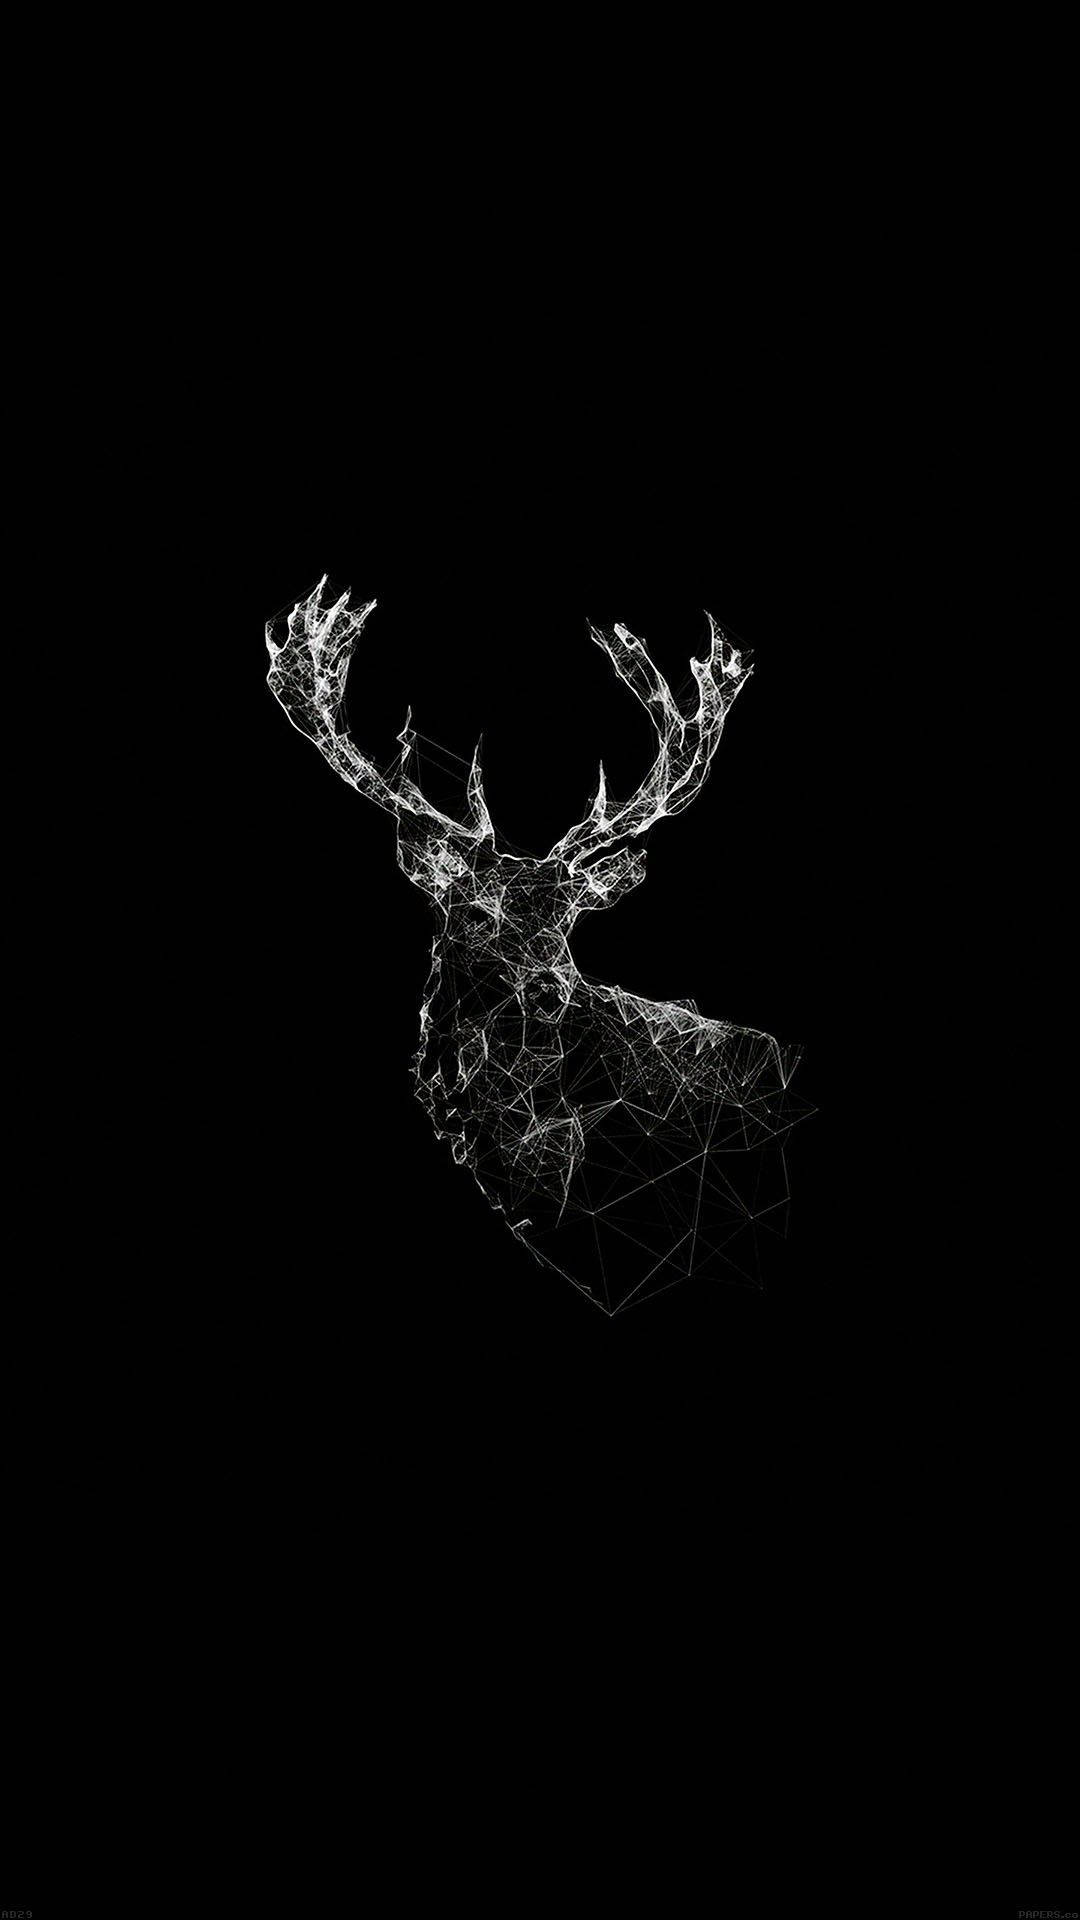 A Deer With Horns On A Black Background Wallpaper